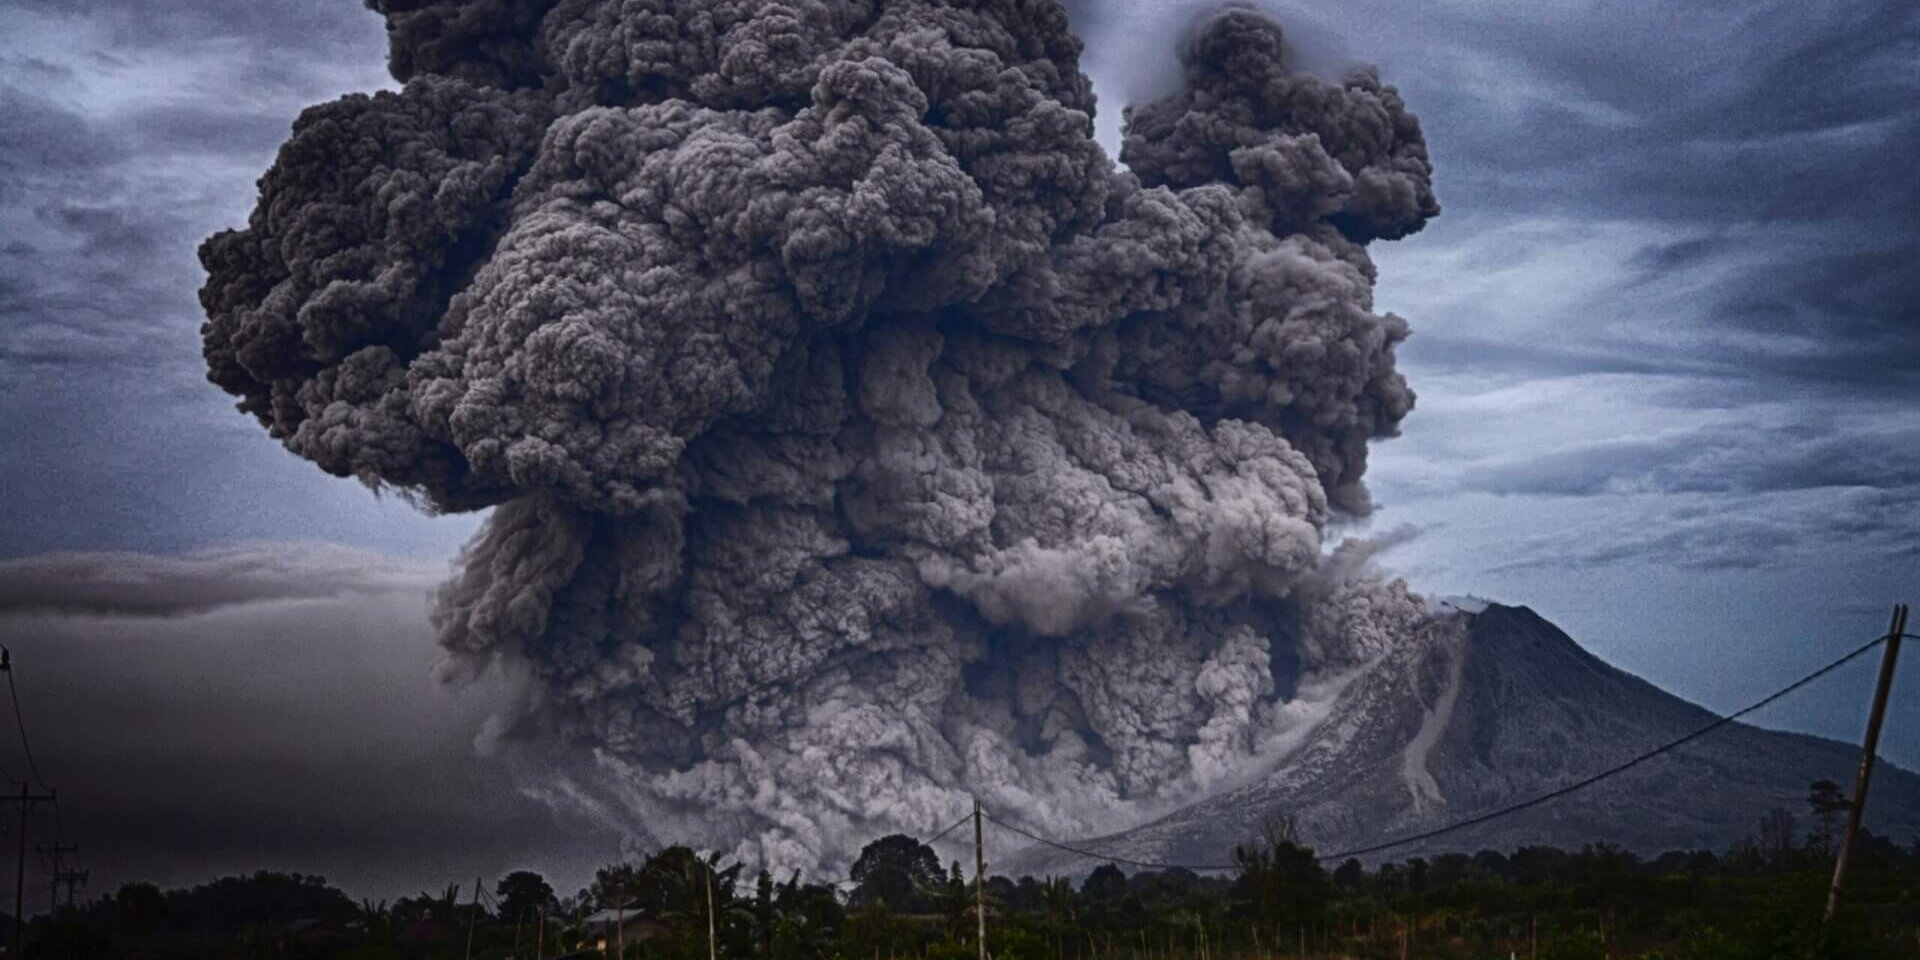 A volcano erupting with clouds of smoke rising from the mountain